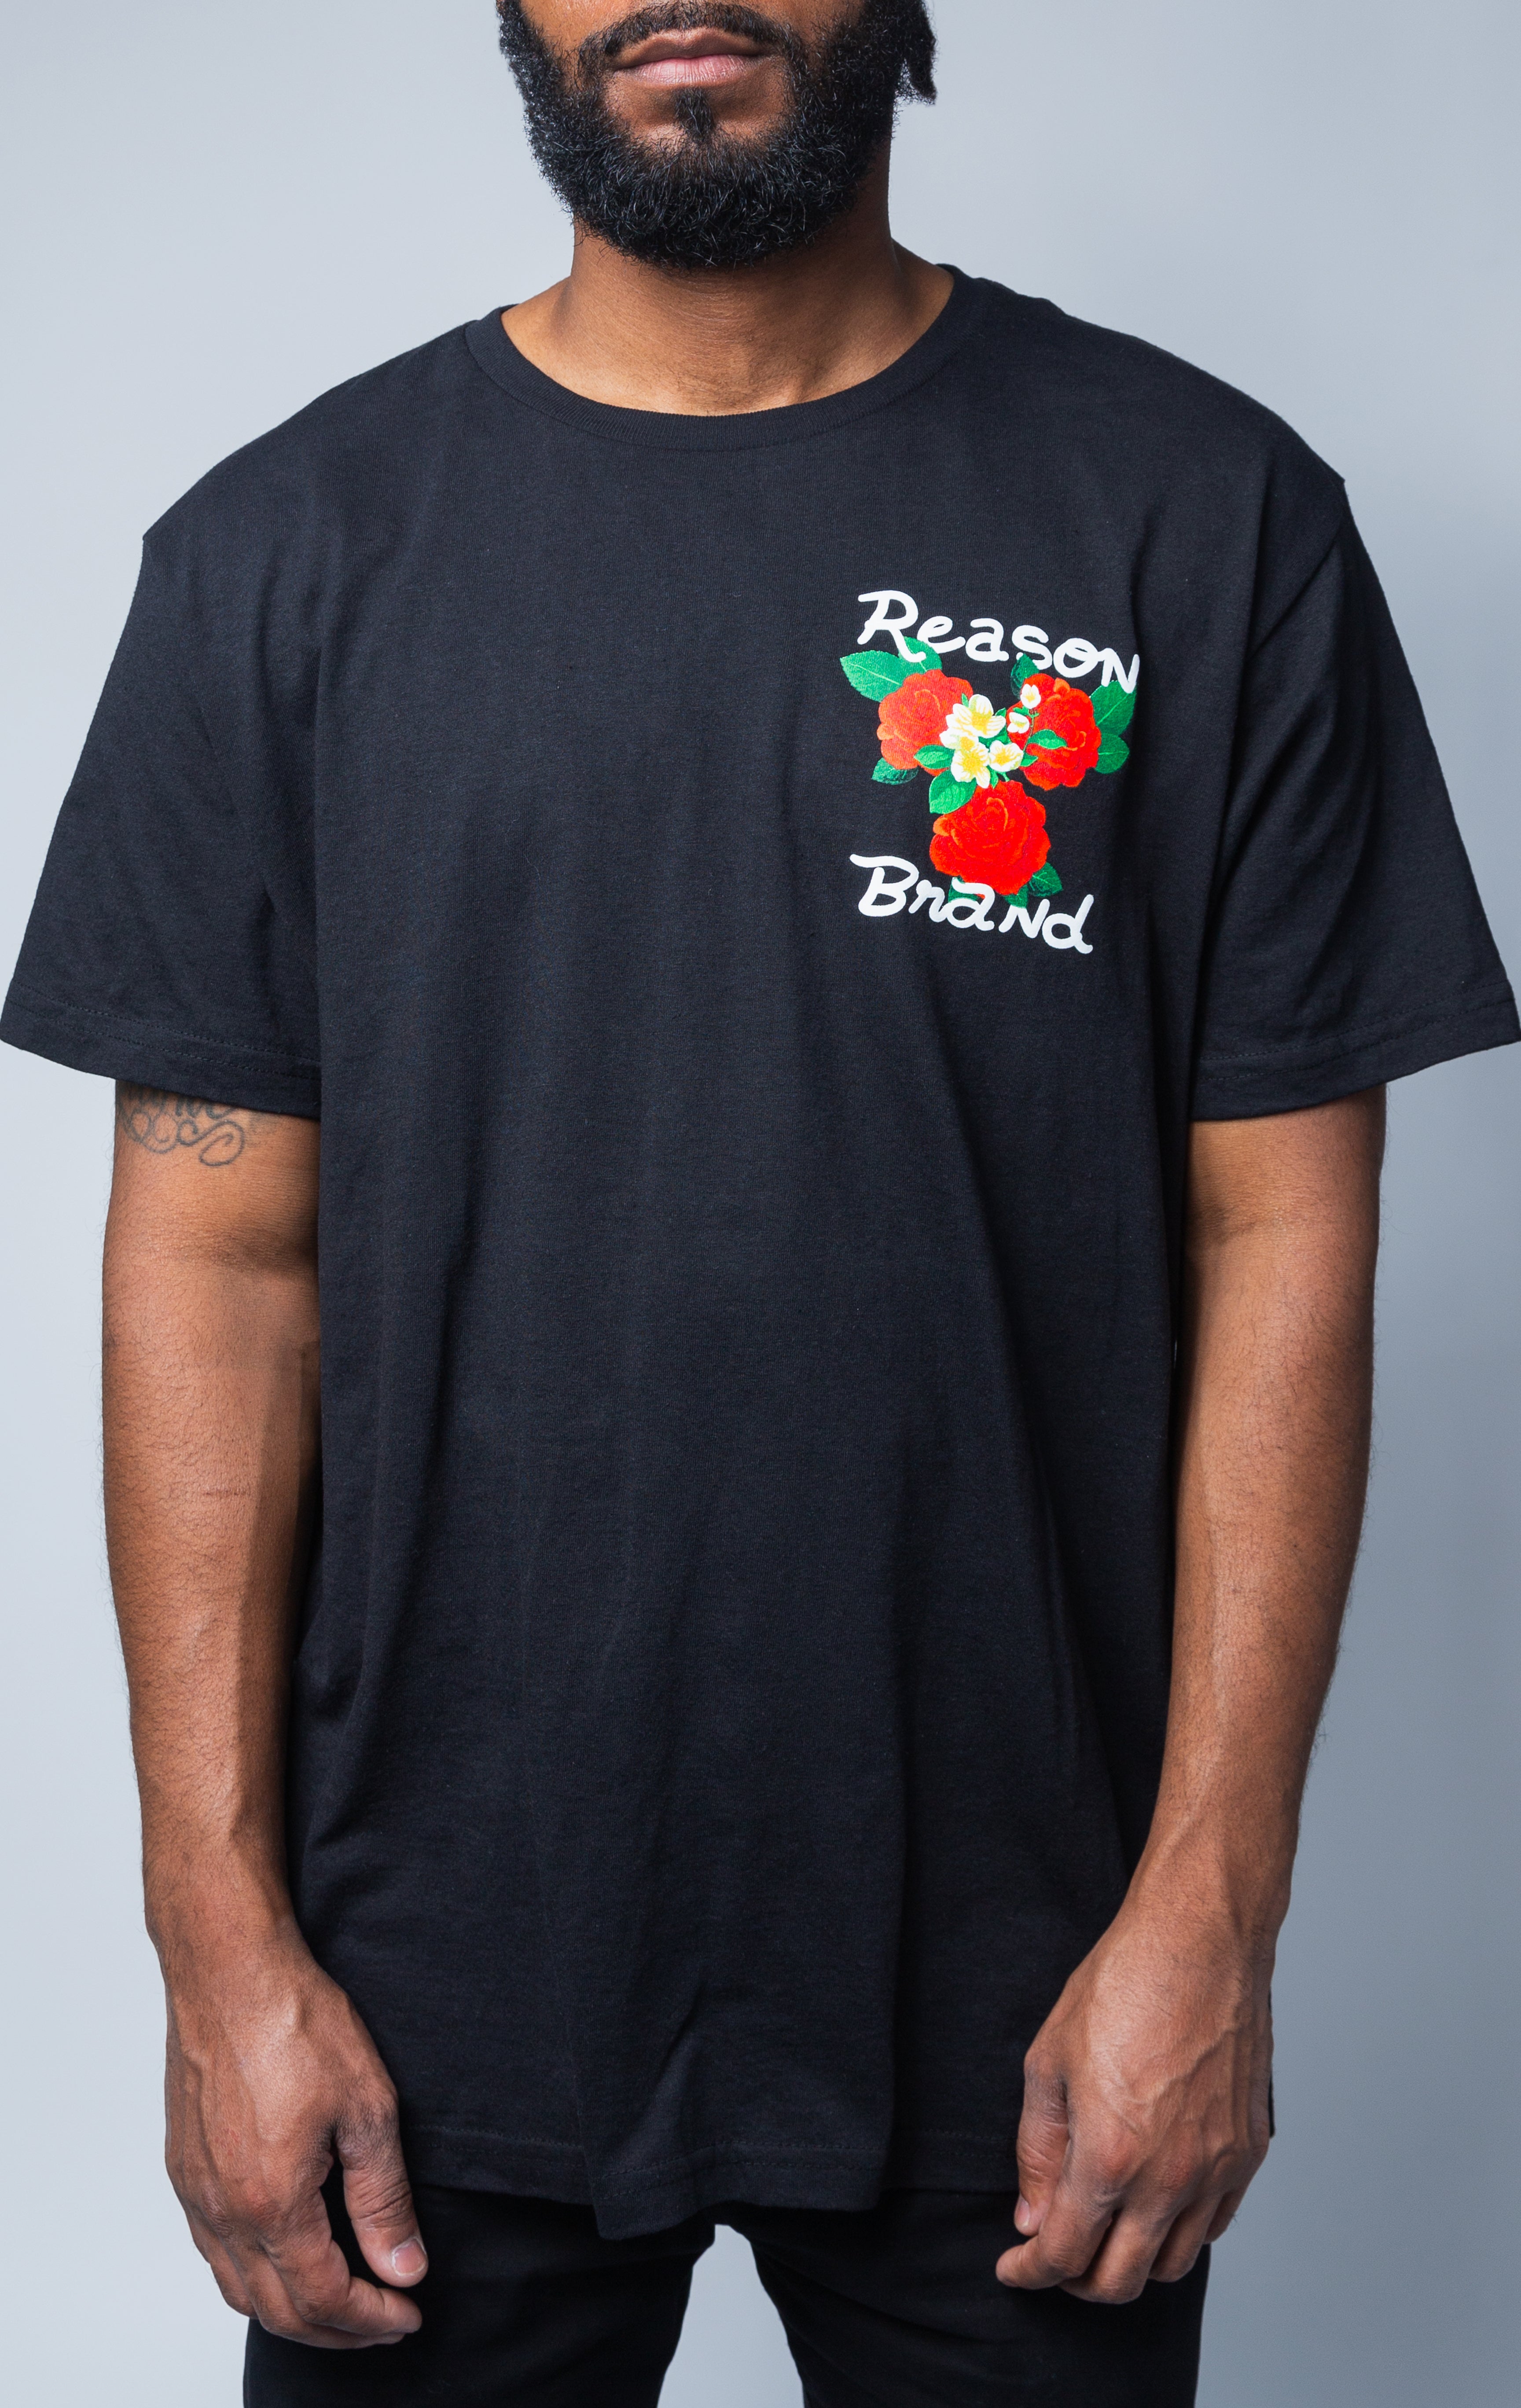 Reason Brand black t-shirt with roses graphic on top left 